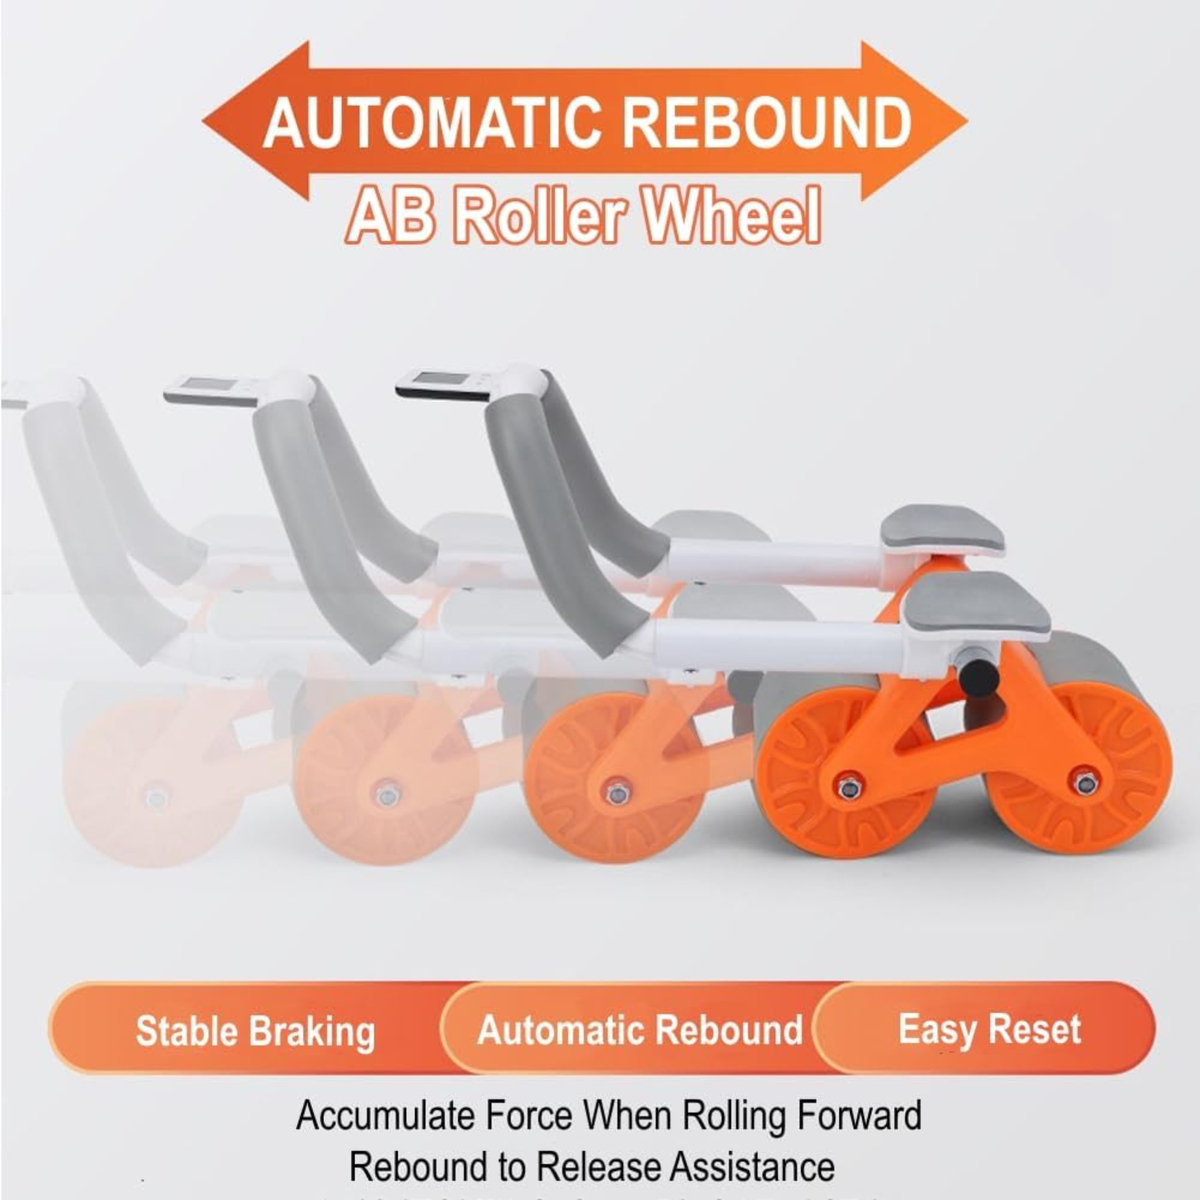 Rebound Auto Roller Wheel , Elbow Support Exercise for Abdominal Muscles, Double Round Workout Equipment, Automatic Rebound Roller Wheel for Home Gym